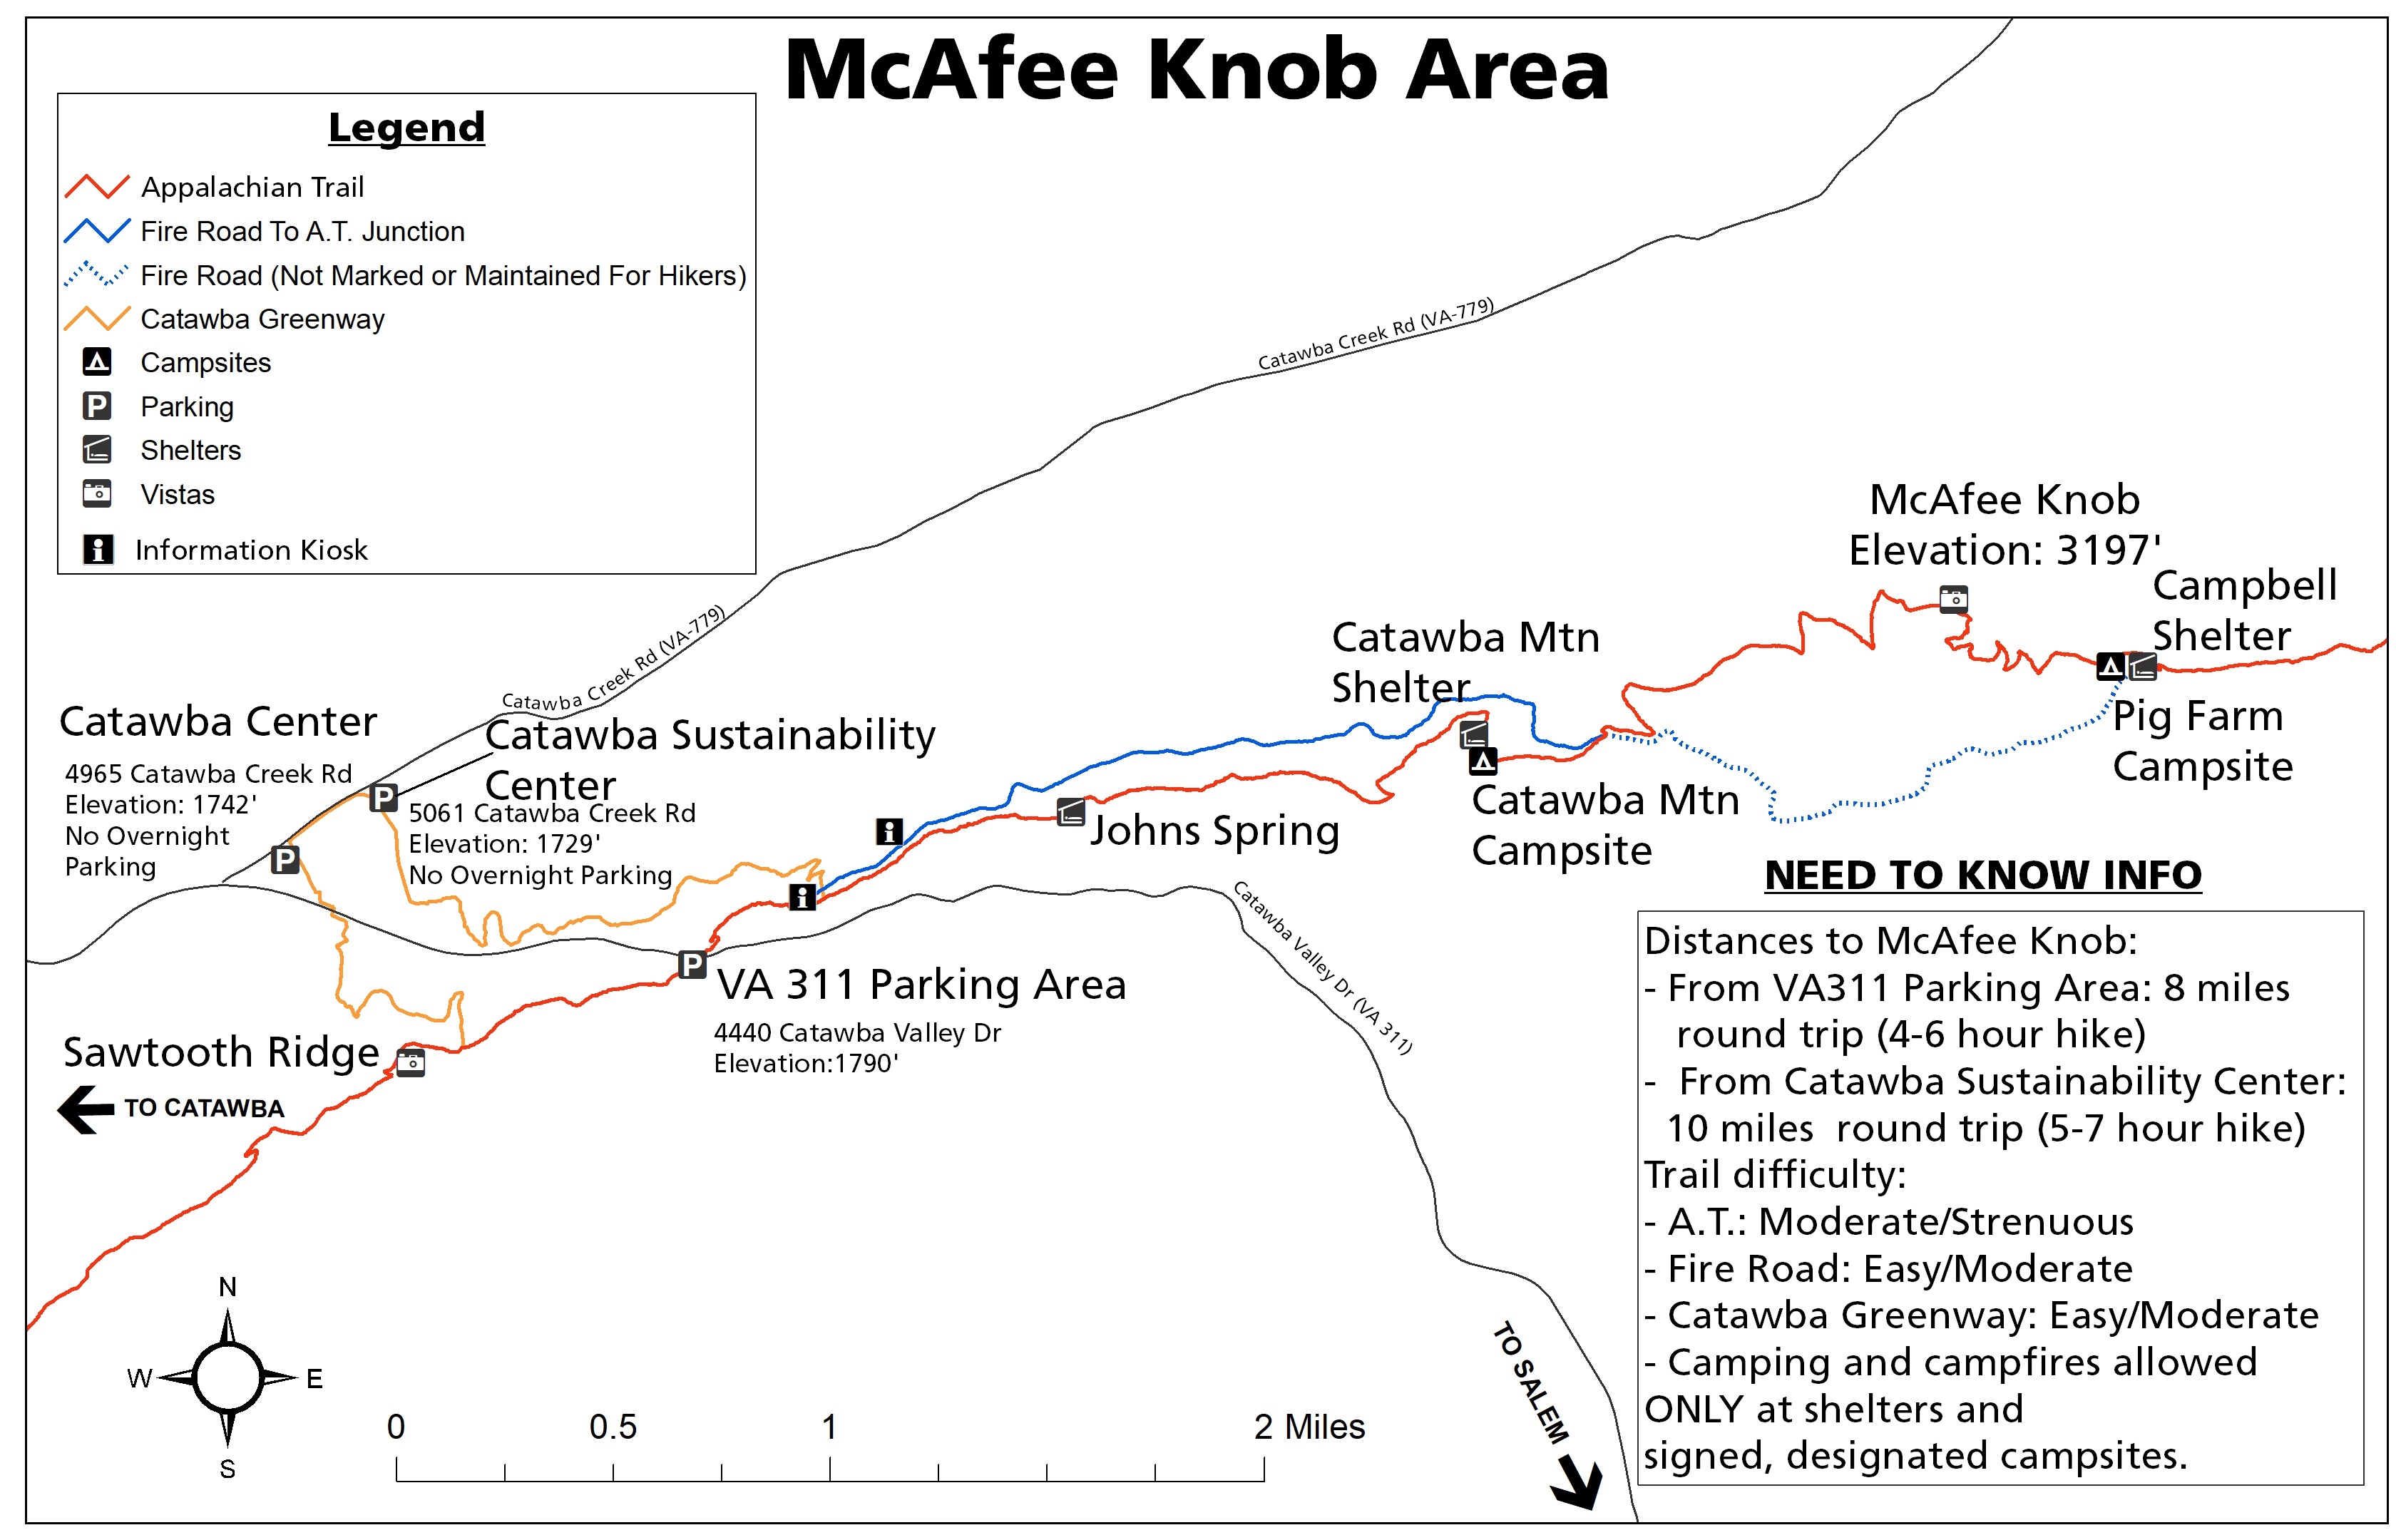 Illustration of the trail path to McAfee Knob